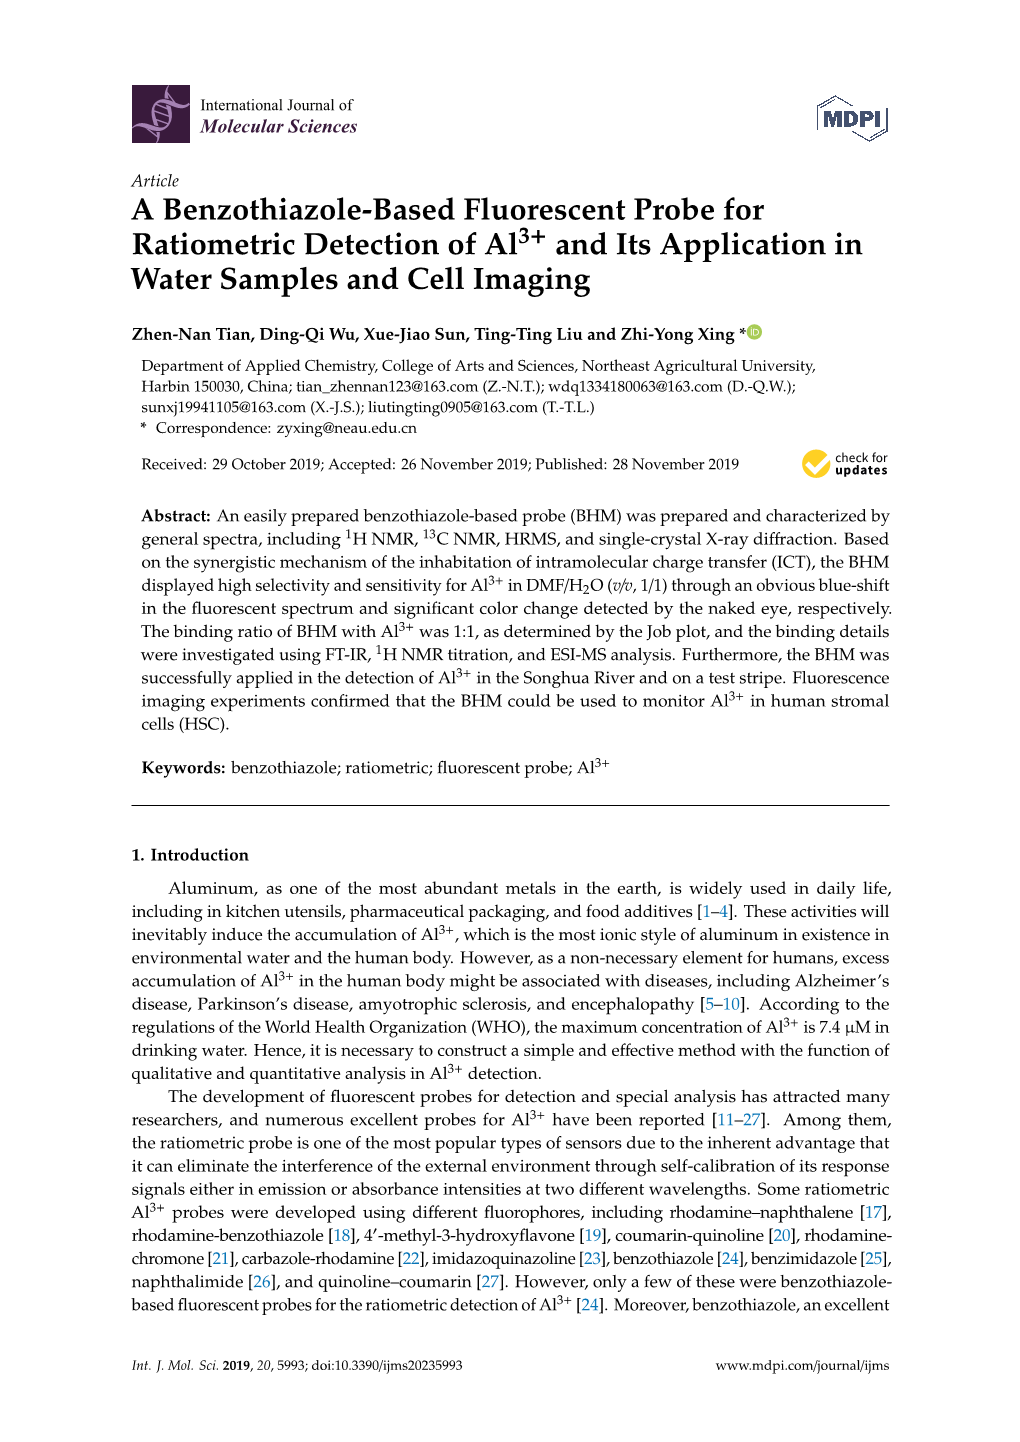 A Benzothiazole-Based Fluorescent Probe for Ratiometric Detection of Al3+ and Its Application in Water Samples and Cell Imaging